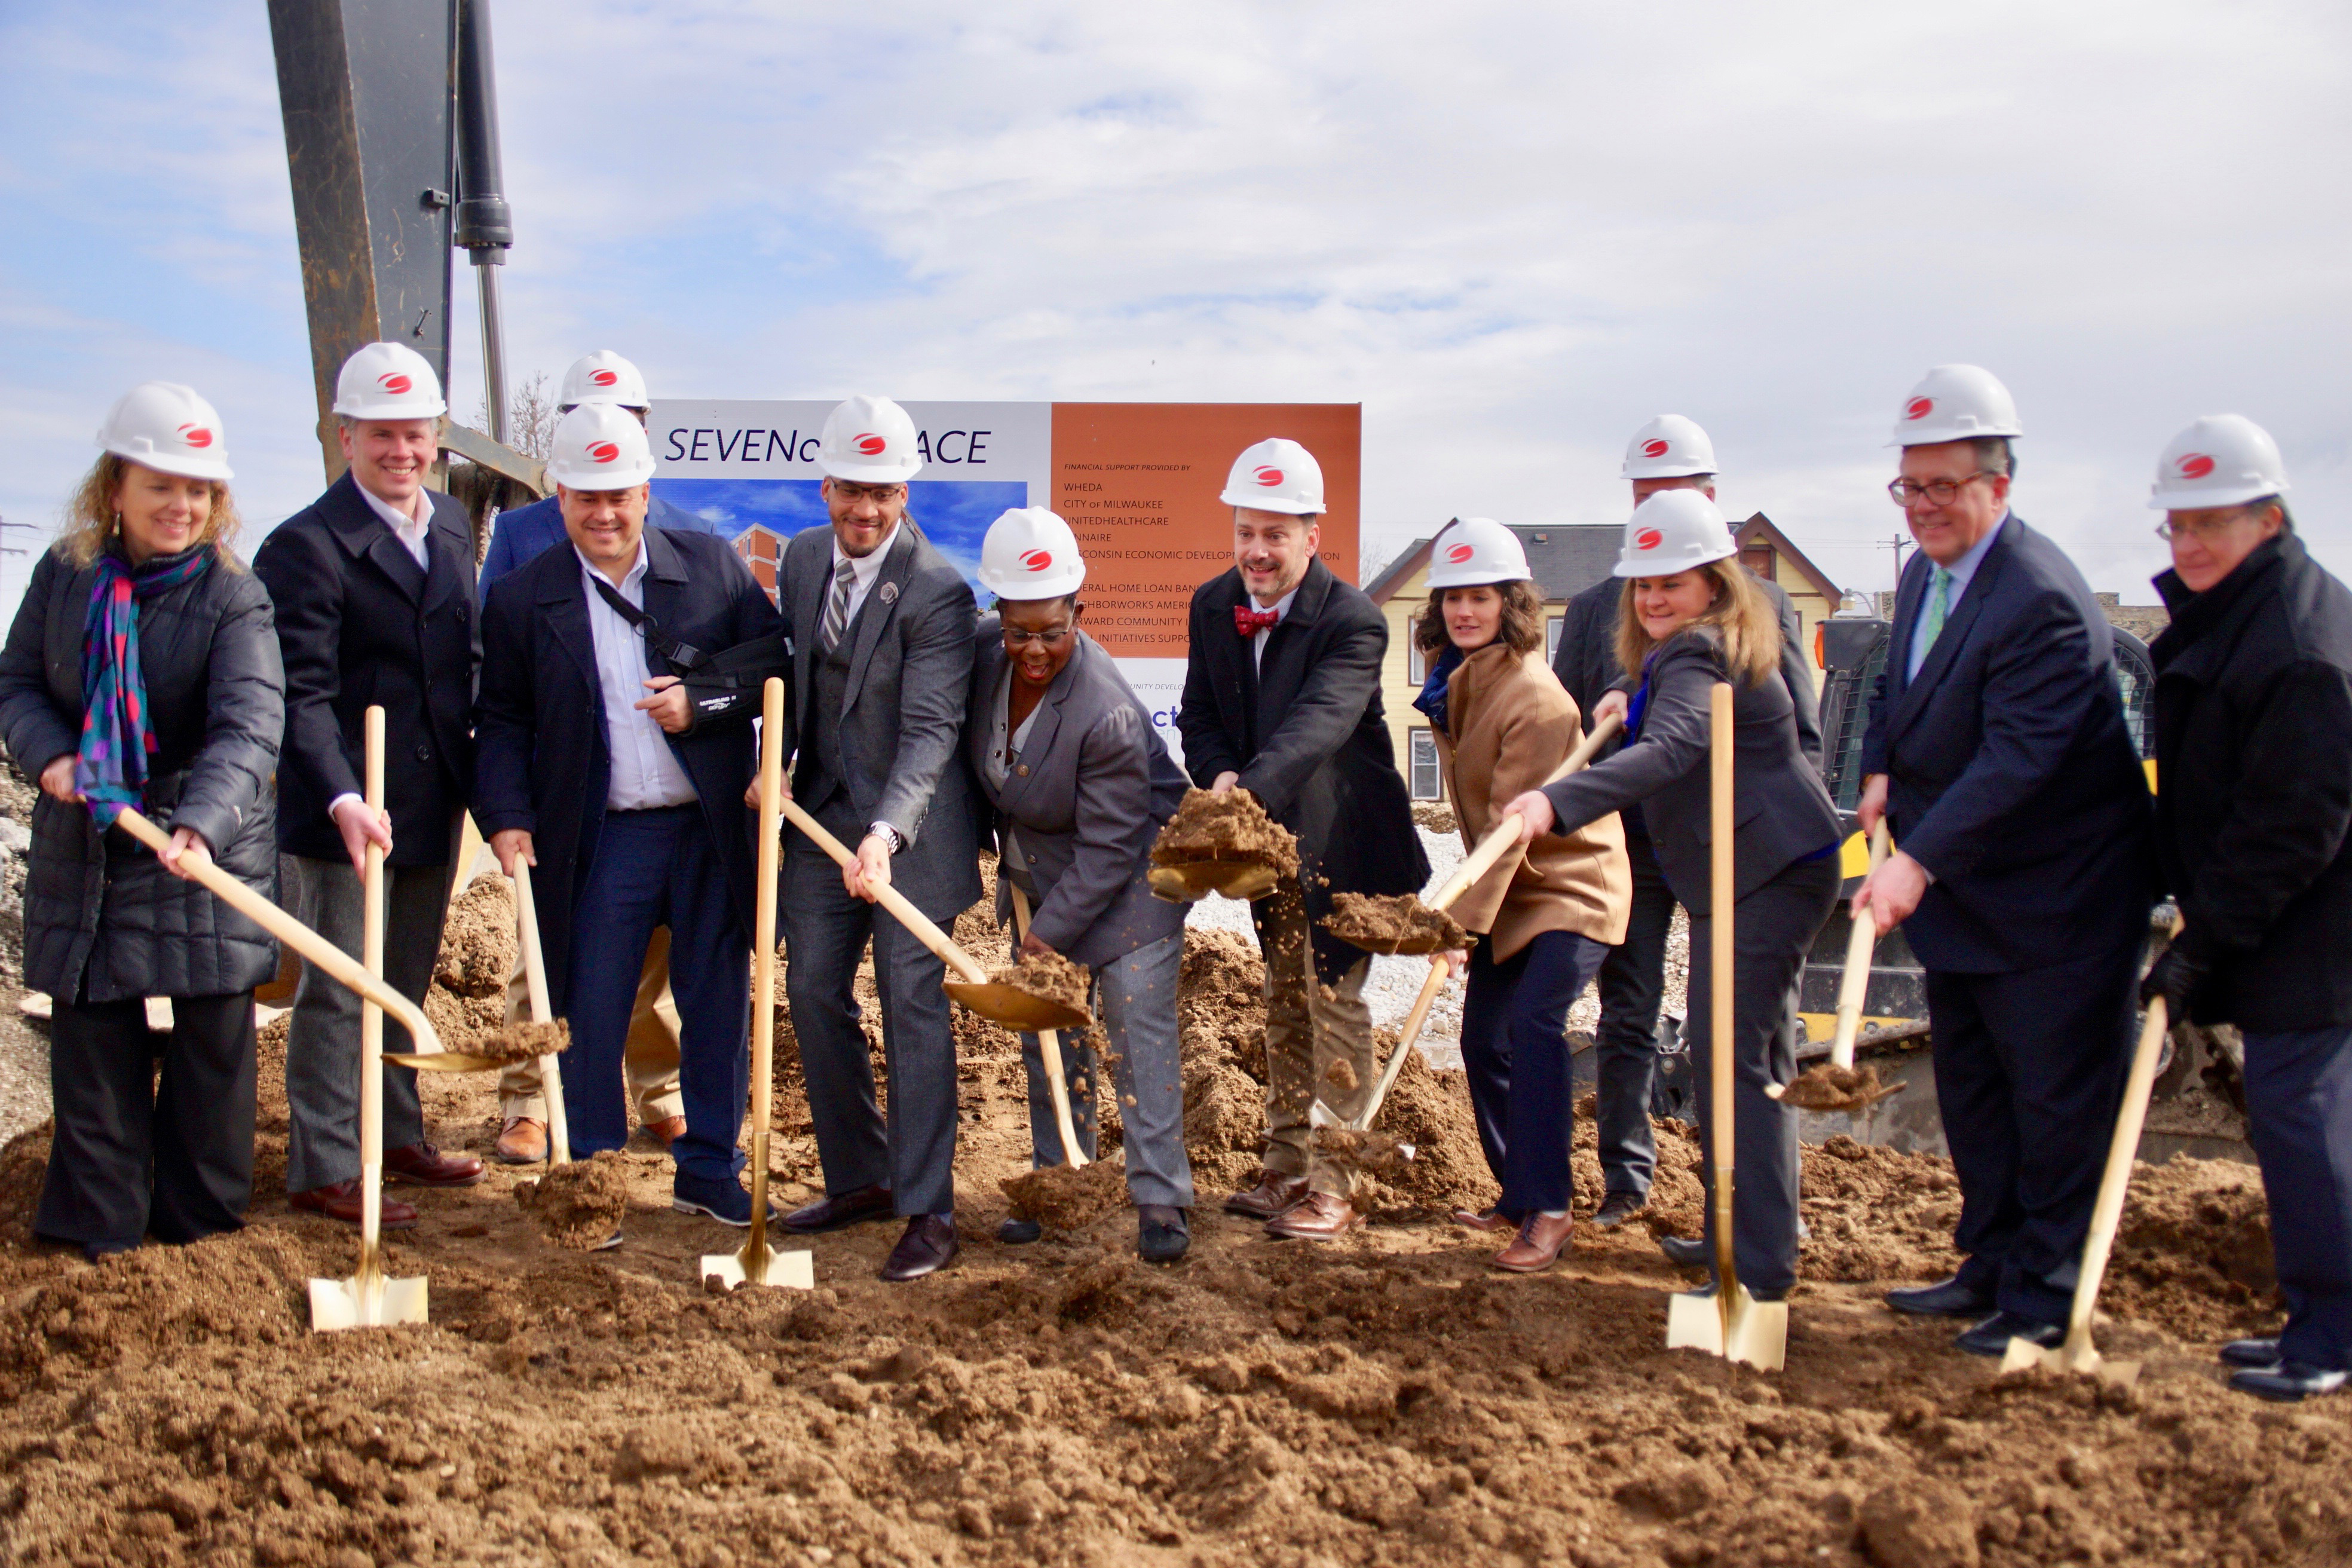 Cinnaire Celebrates Start of Construction for SEVEN04 Place